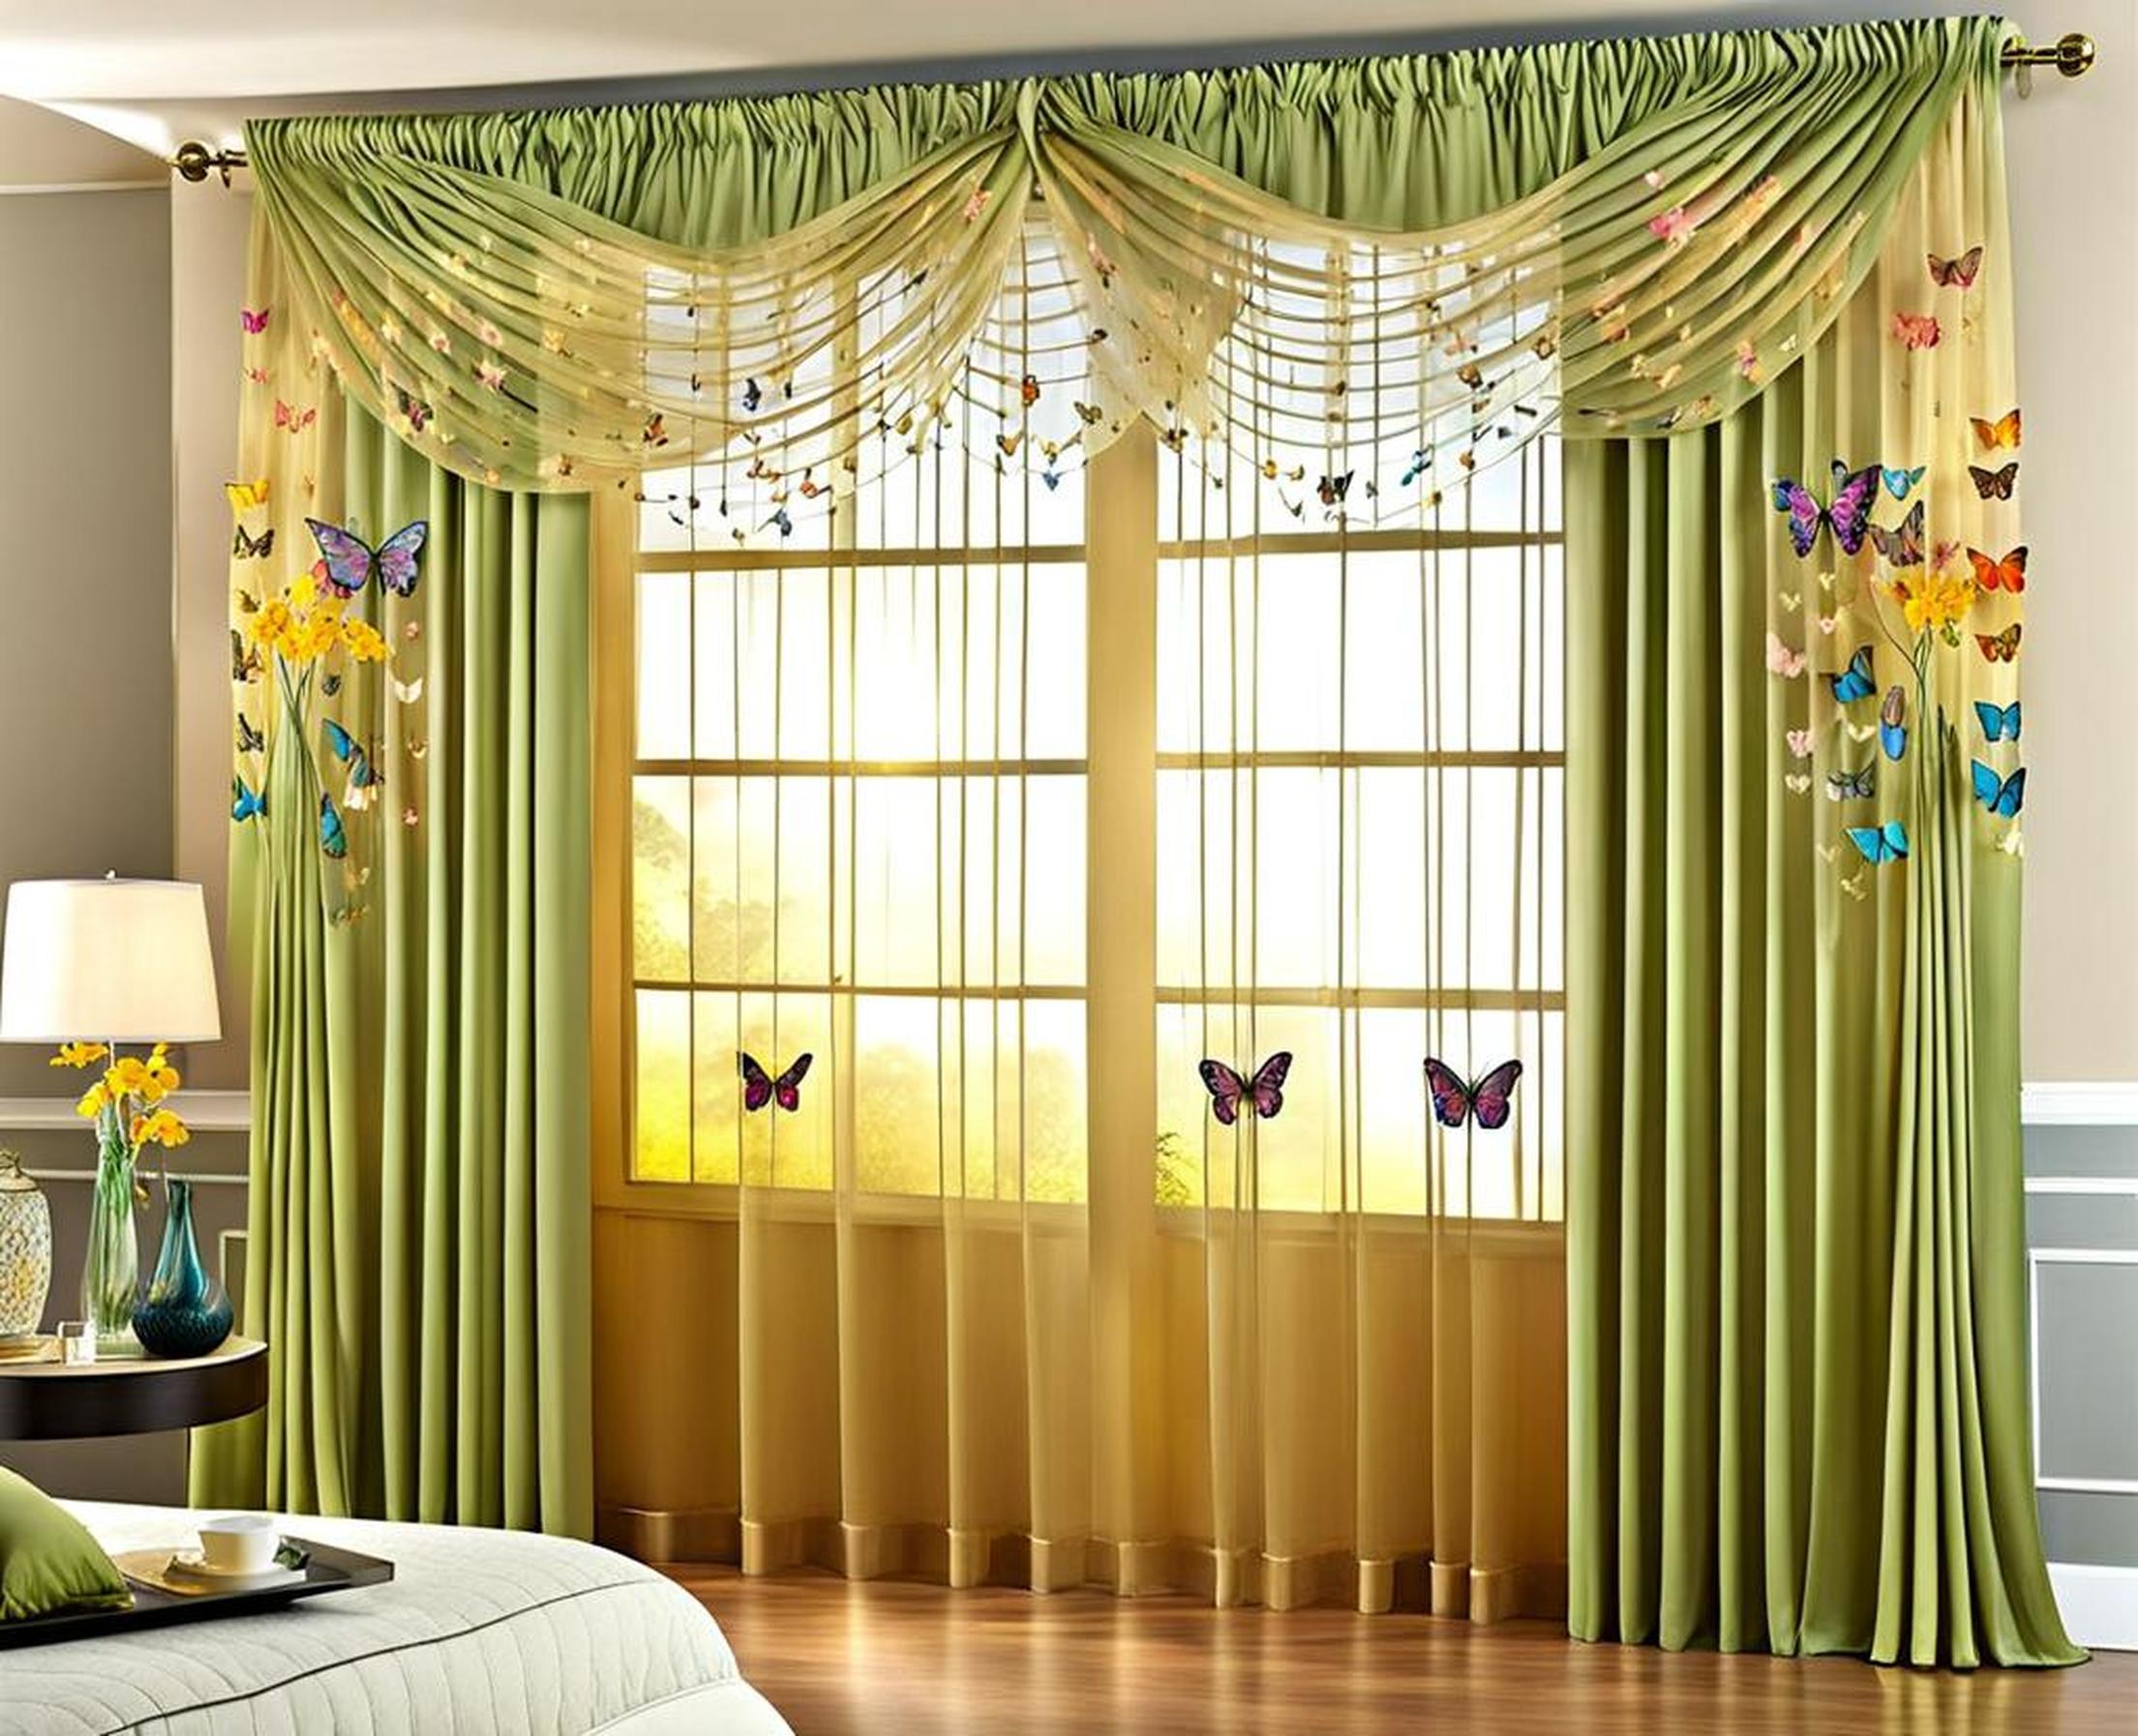 sheer curtains with butterflies